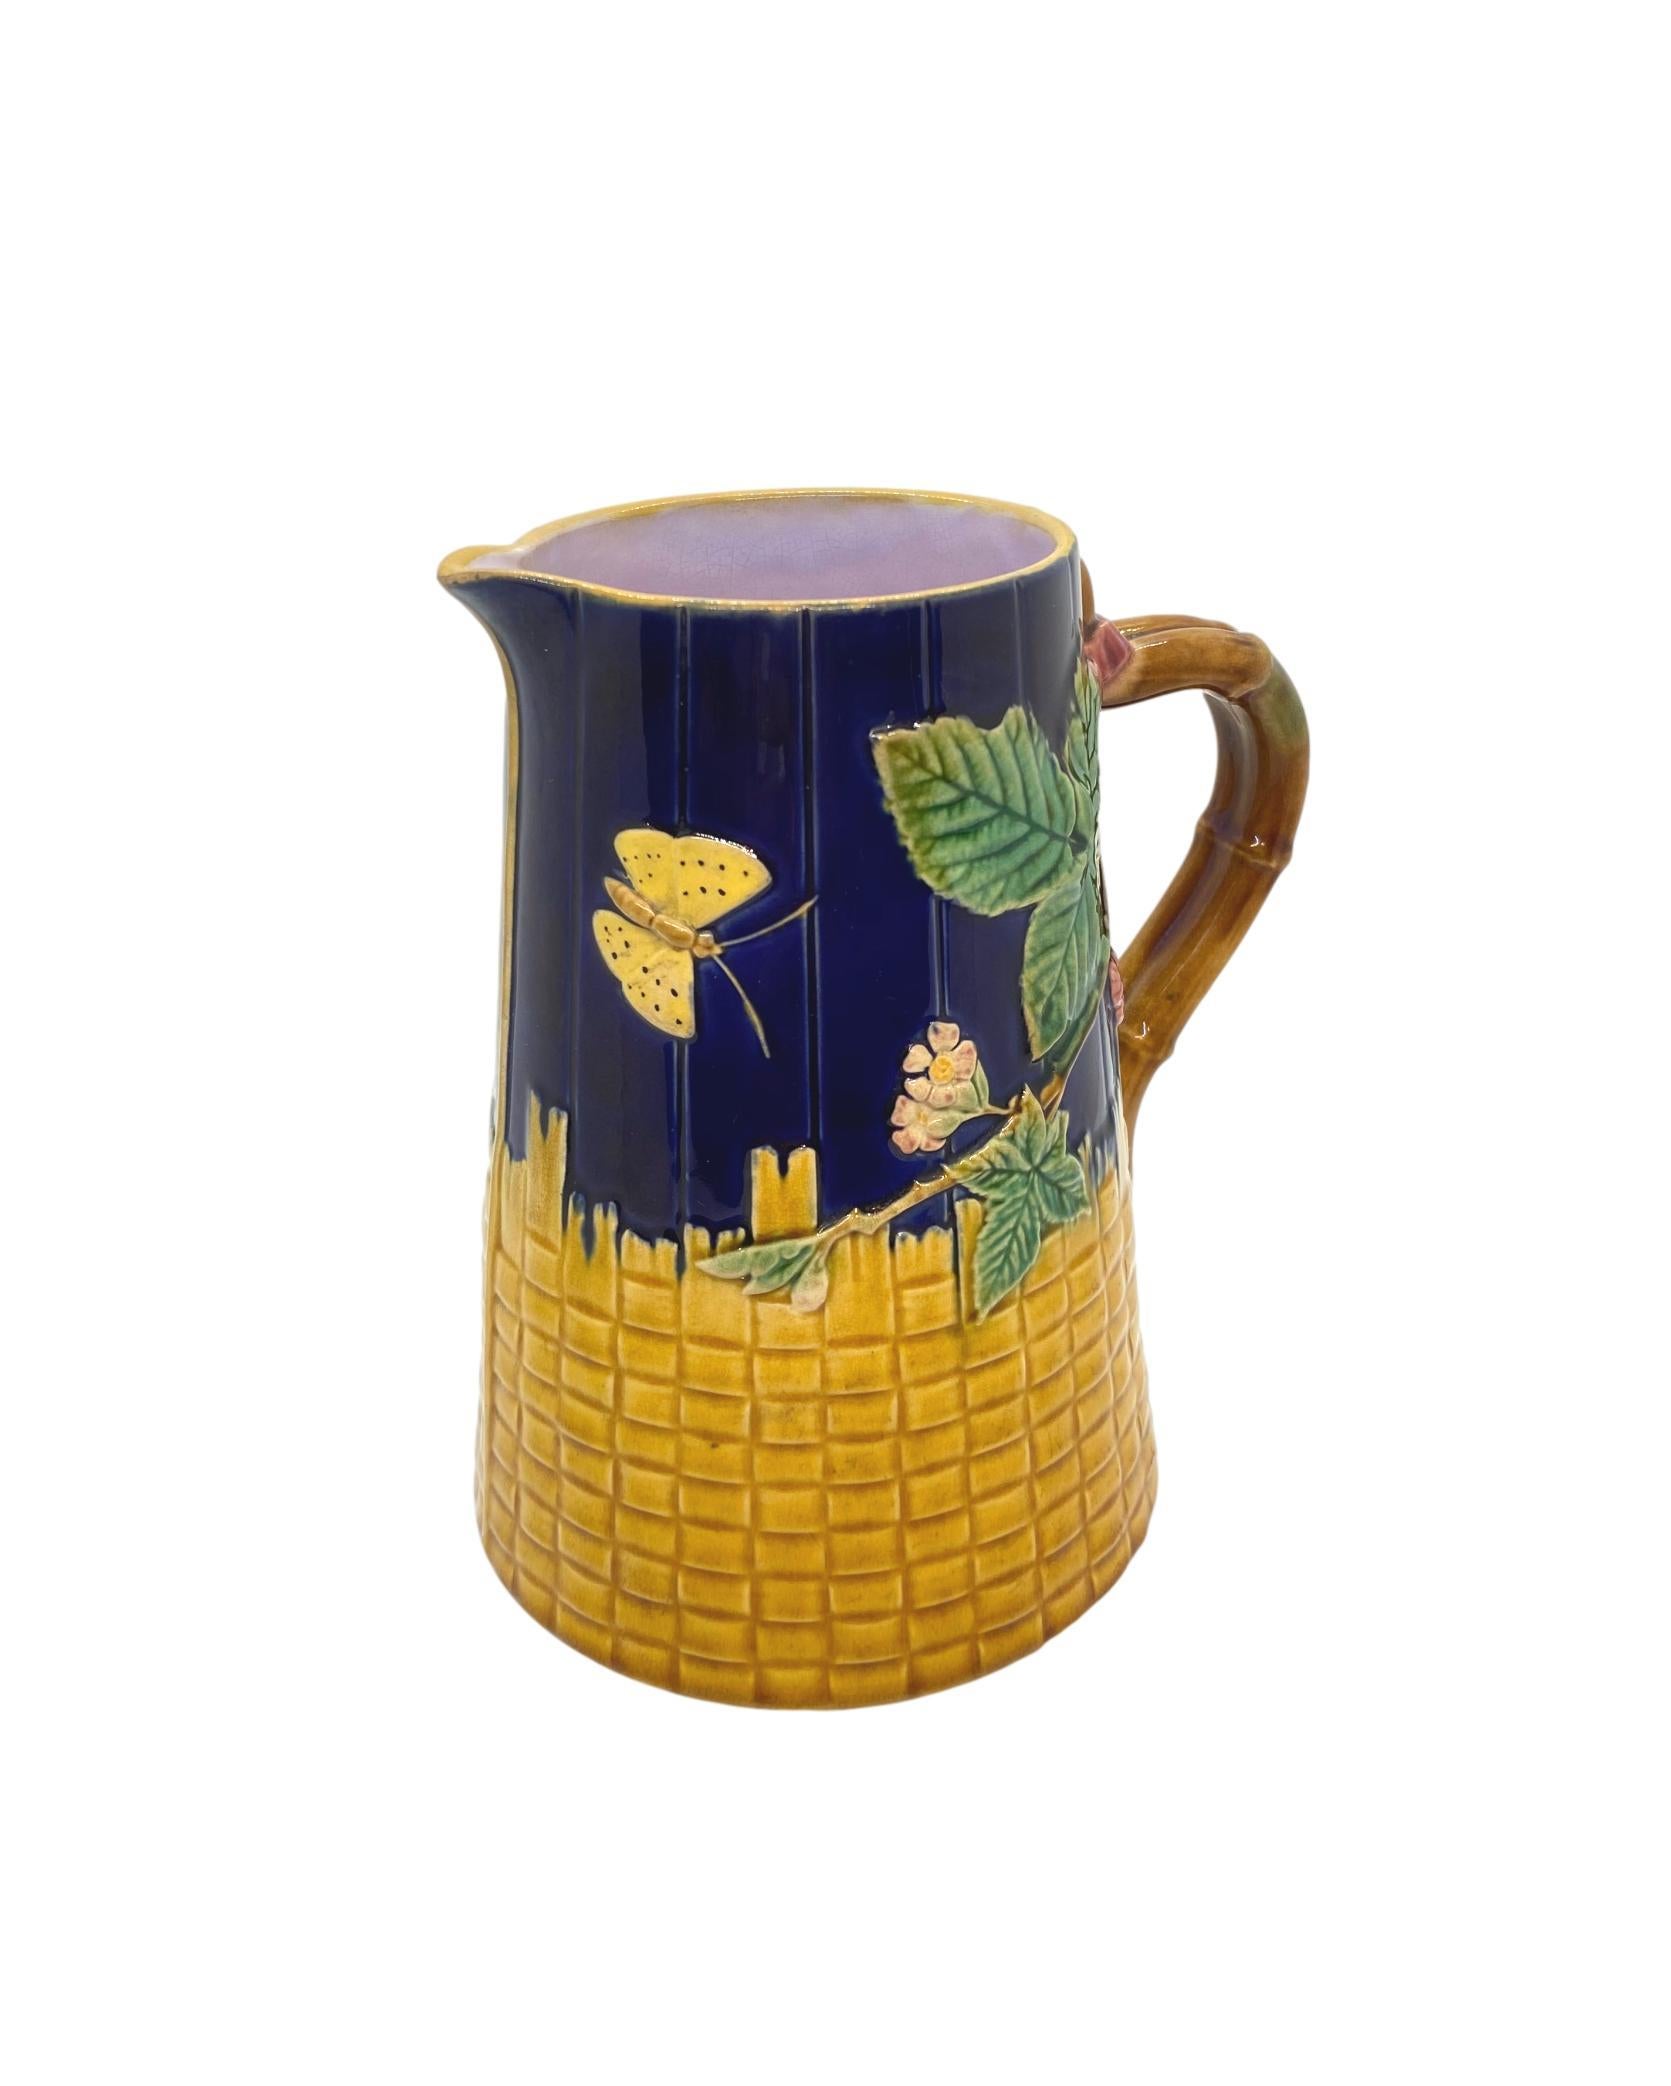 T. C. Brown-Westhead Moore & Co. Majolica Butterfly Pitcher, on cobalt blue-glazed simulated wooden staves and Yellow Basketweave, with faux bamboo handles, the interior glazed in lavender, the reverse with British Registry Mark for 19 September